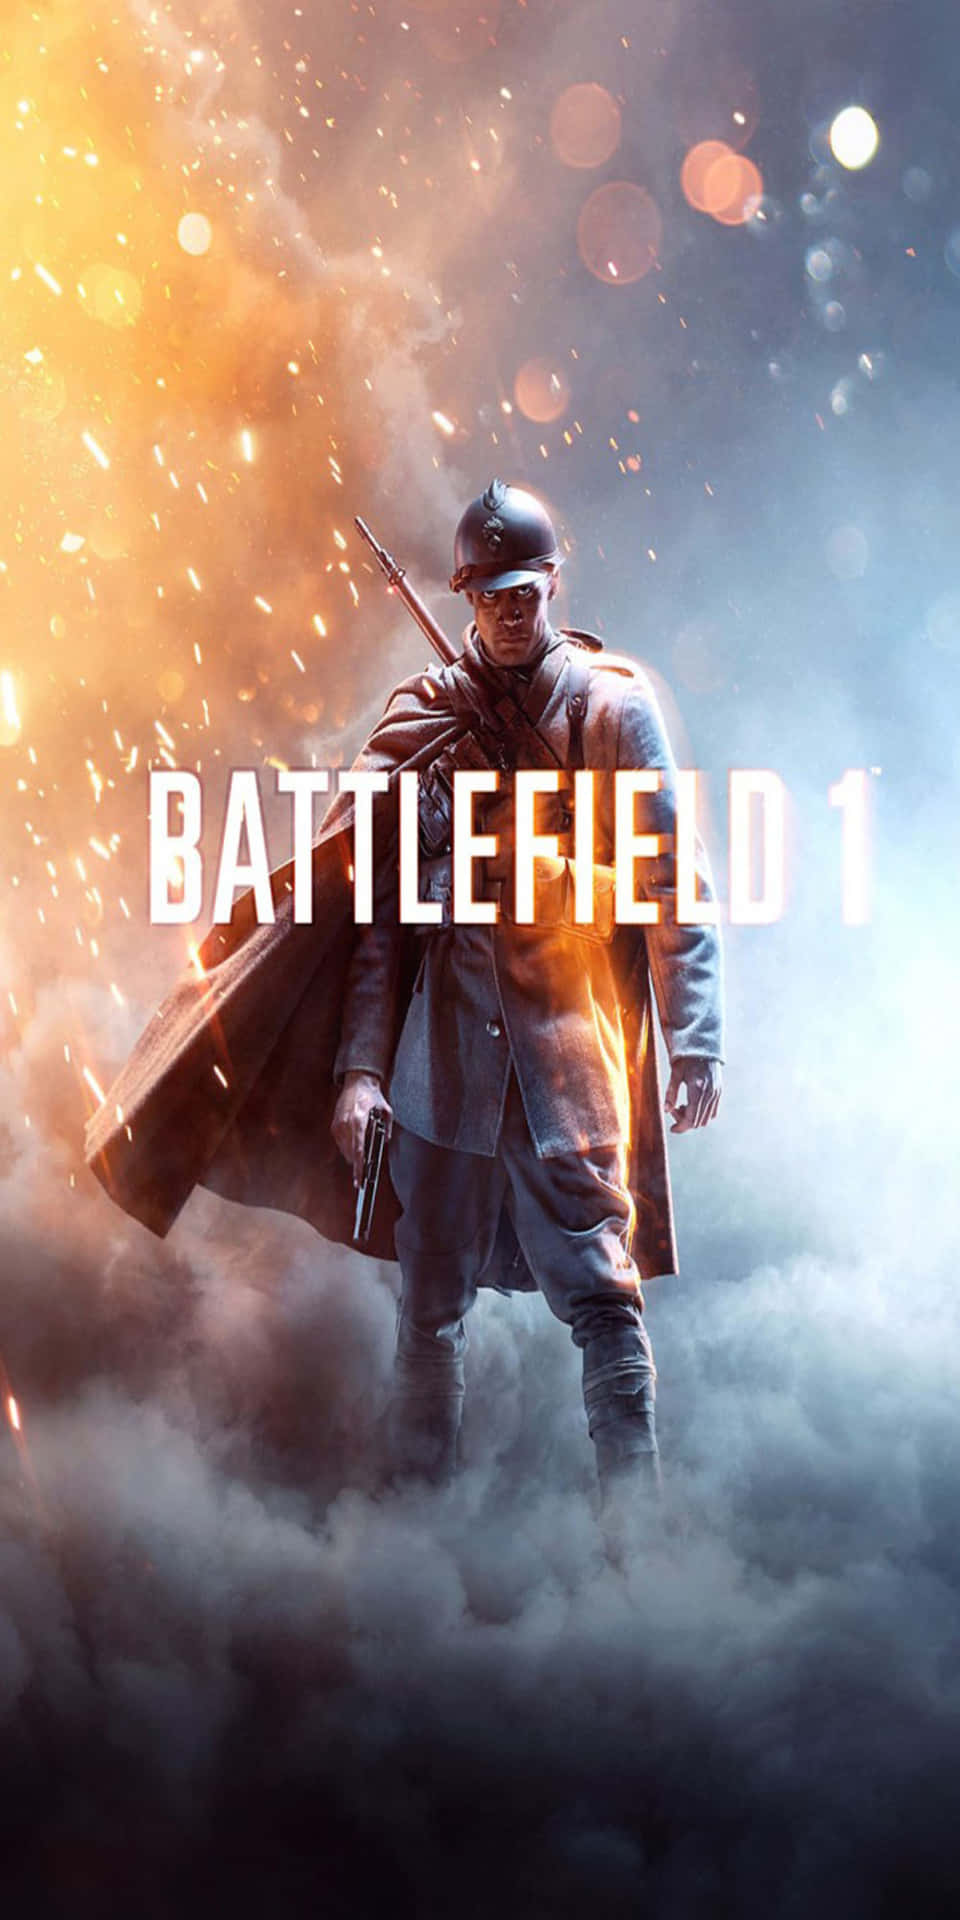 Smash Your Way Through Battlefield 1 on the Pixel 3